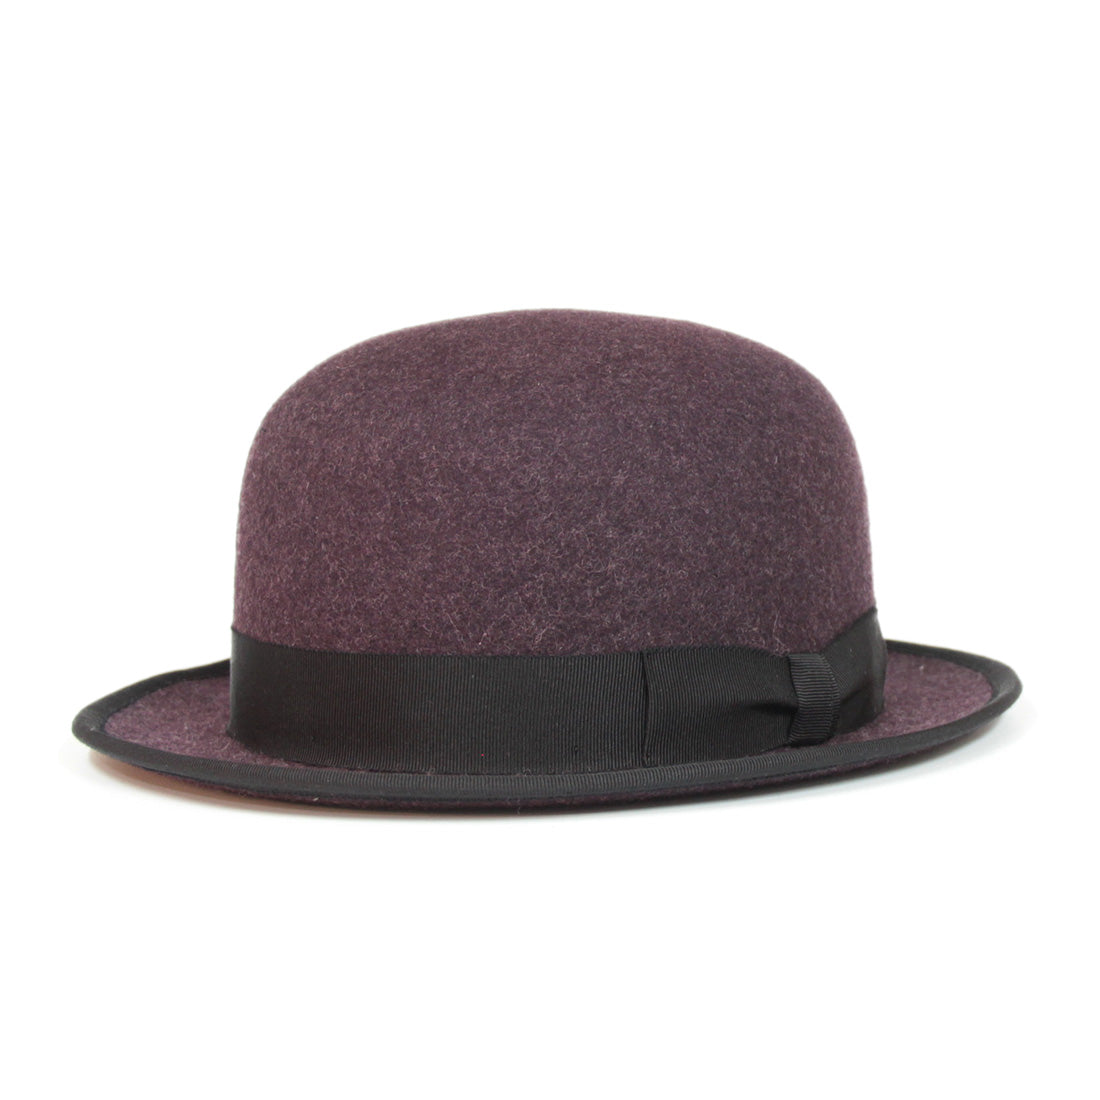 【The Blueno Works】Stingy Bowler Hat mix